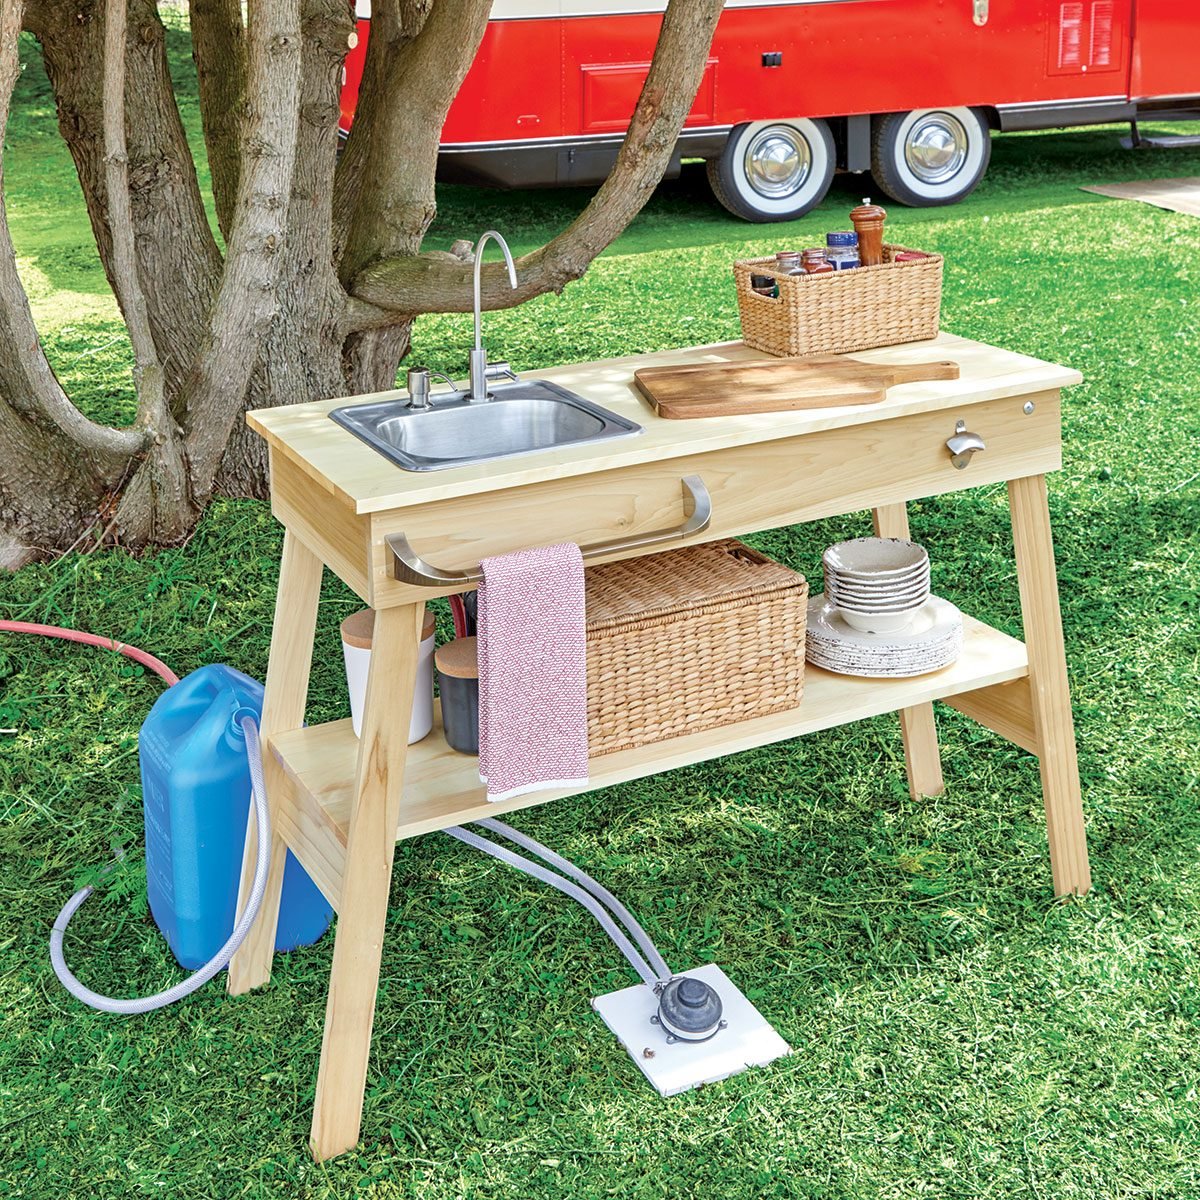 How to Build a Portable Prep Table for Your RV Road Trip